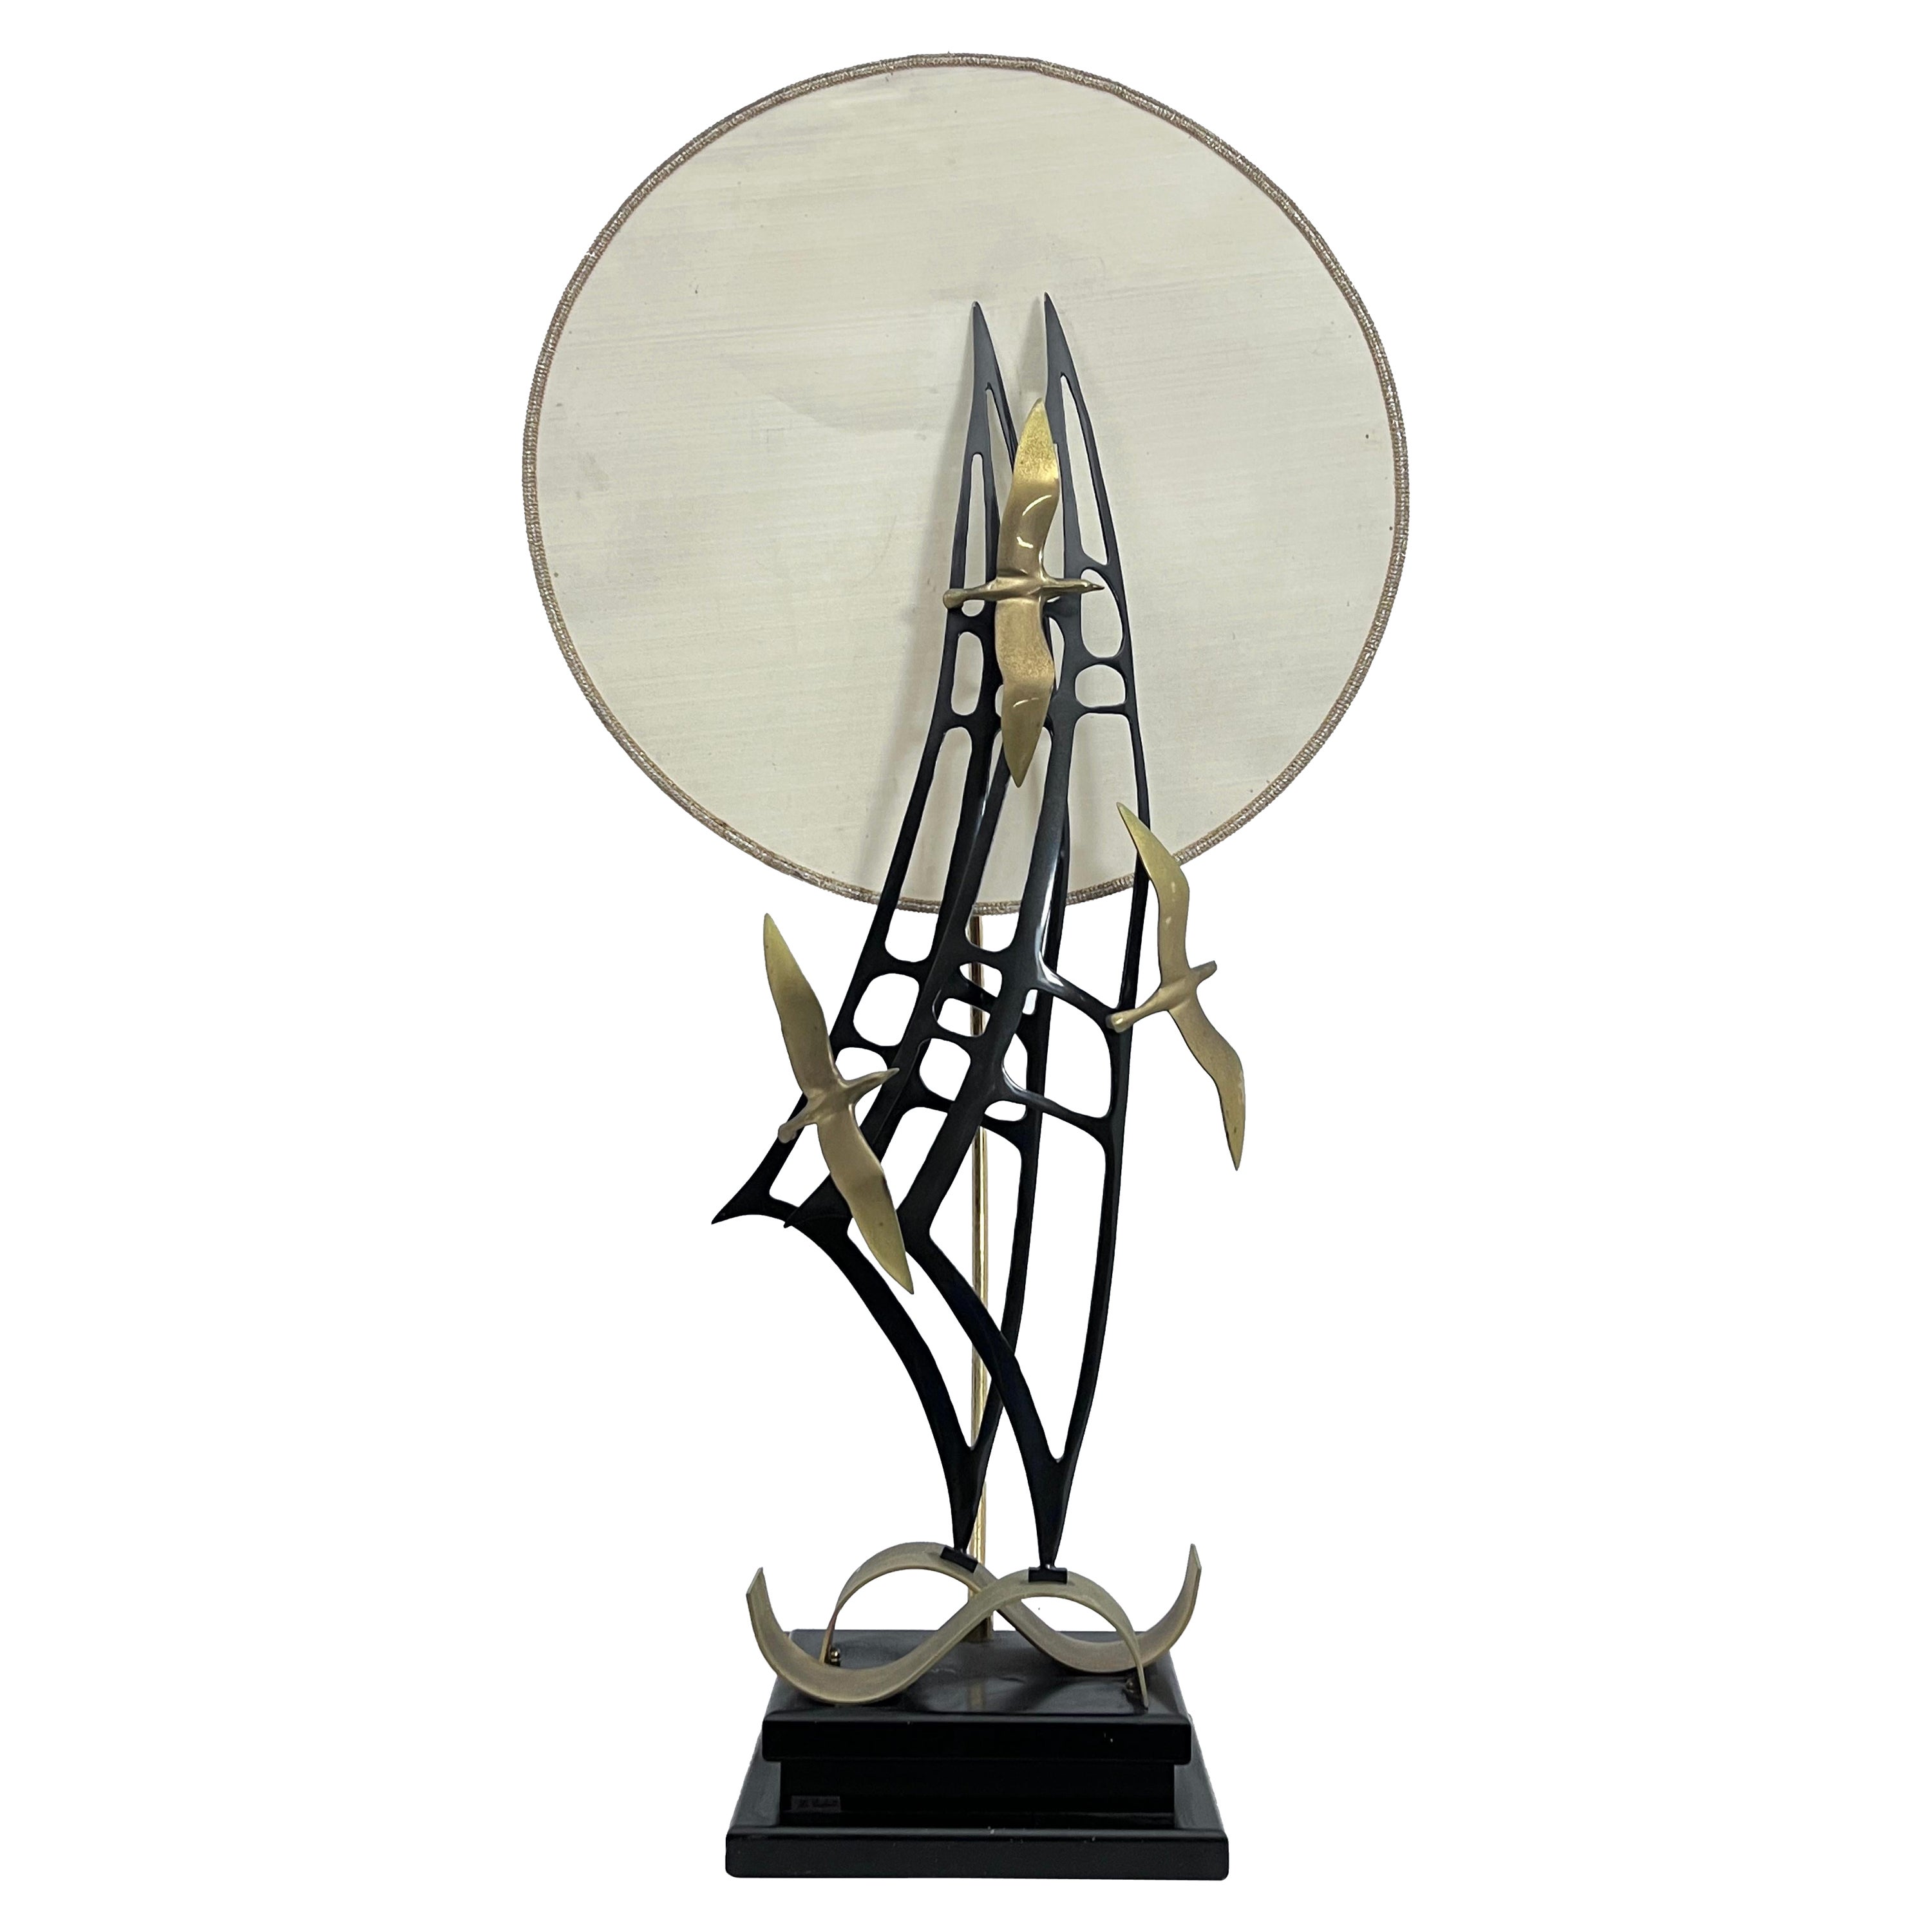 Lanciotto Galeotti, Midcentury Gold-Plated Italian Lamp by L'Originale, 1970s For Sale